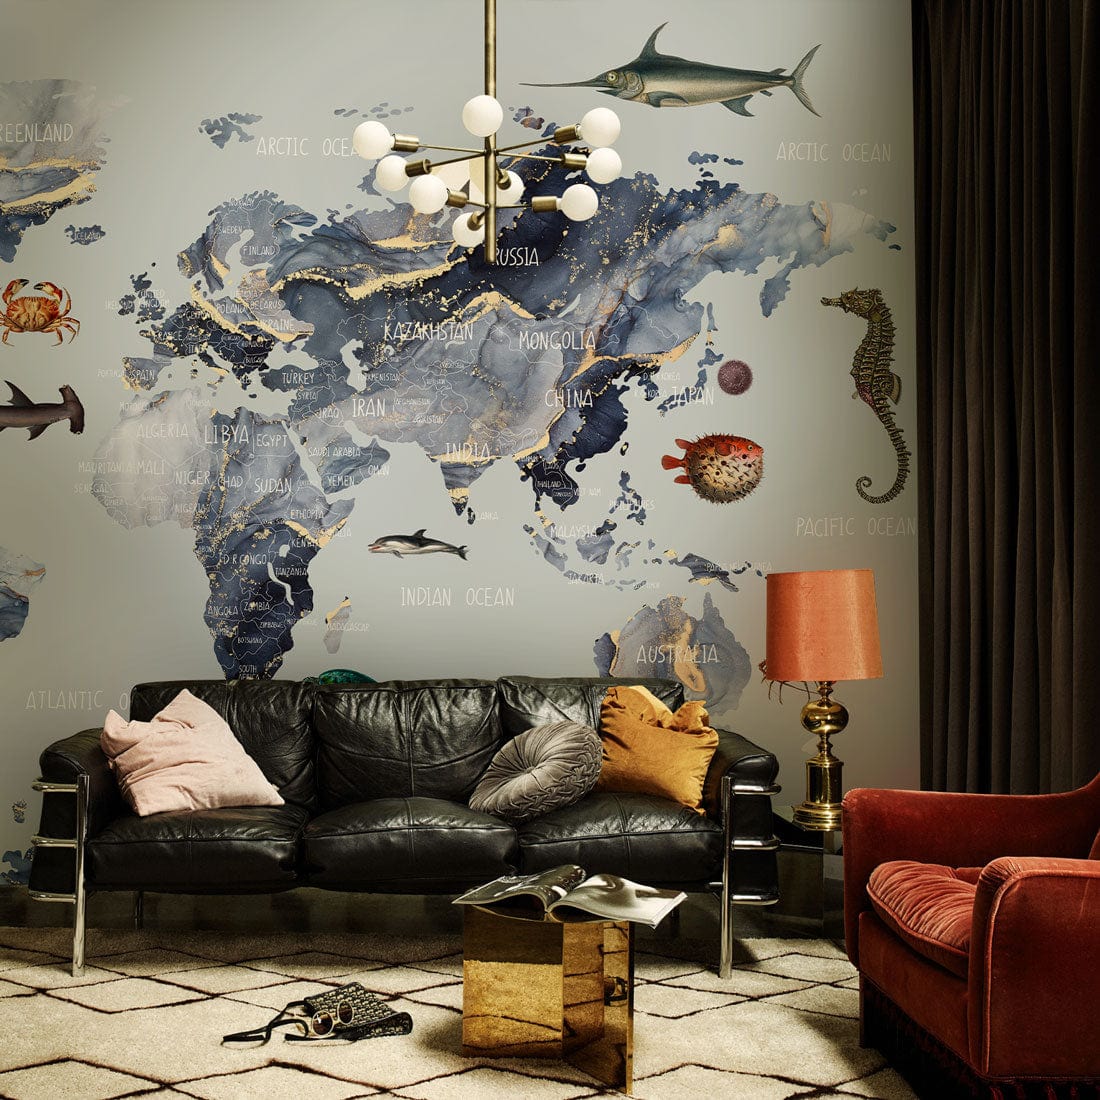 Decoration for the living room using a wallpaper mural of a grey marble map